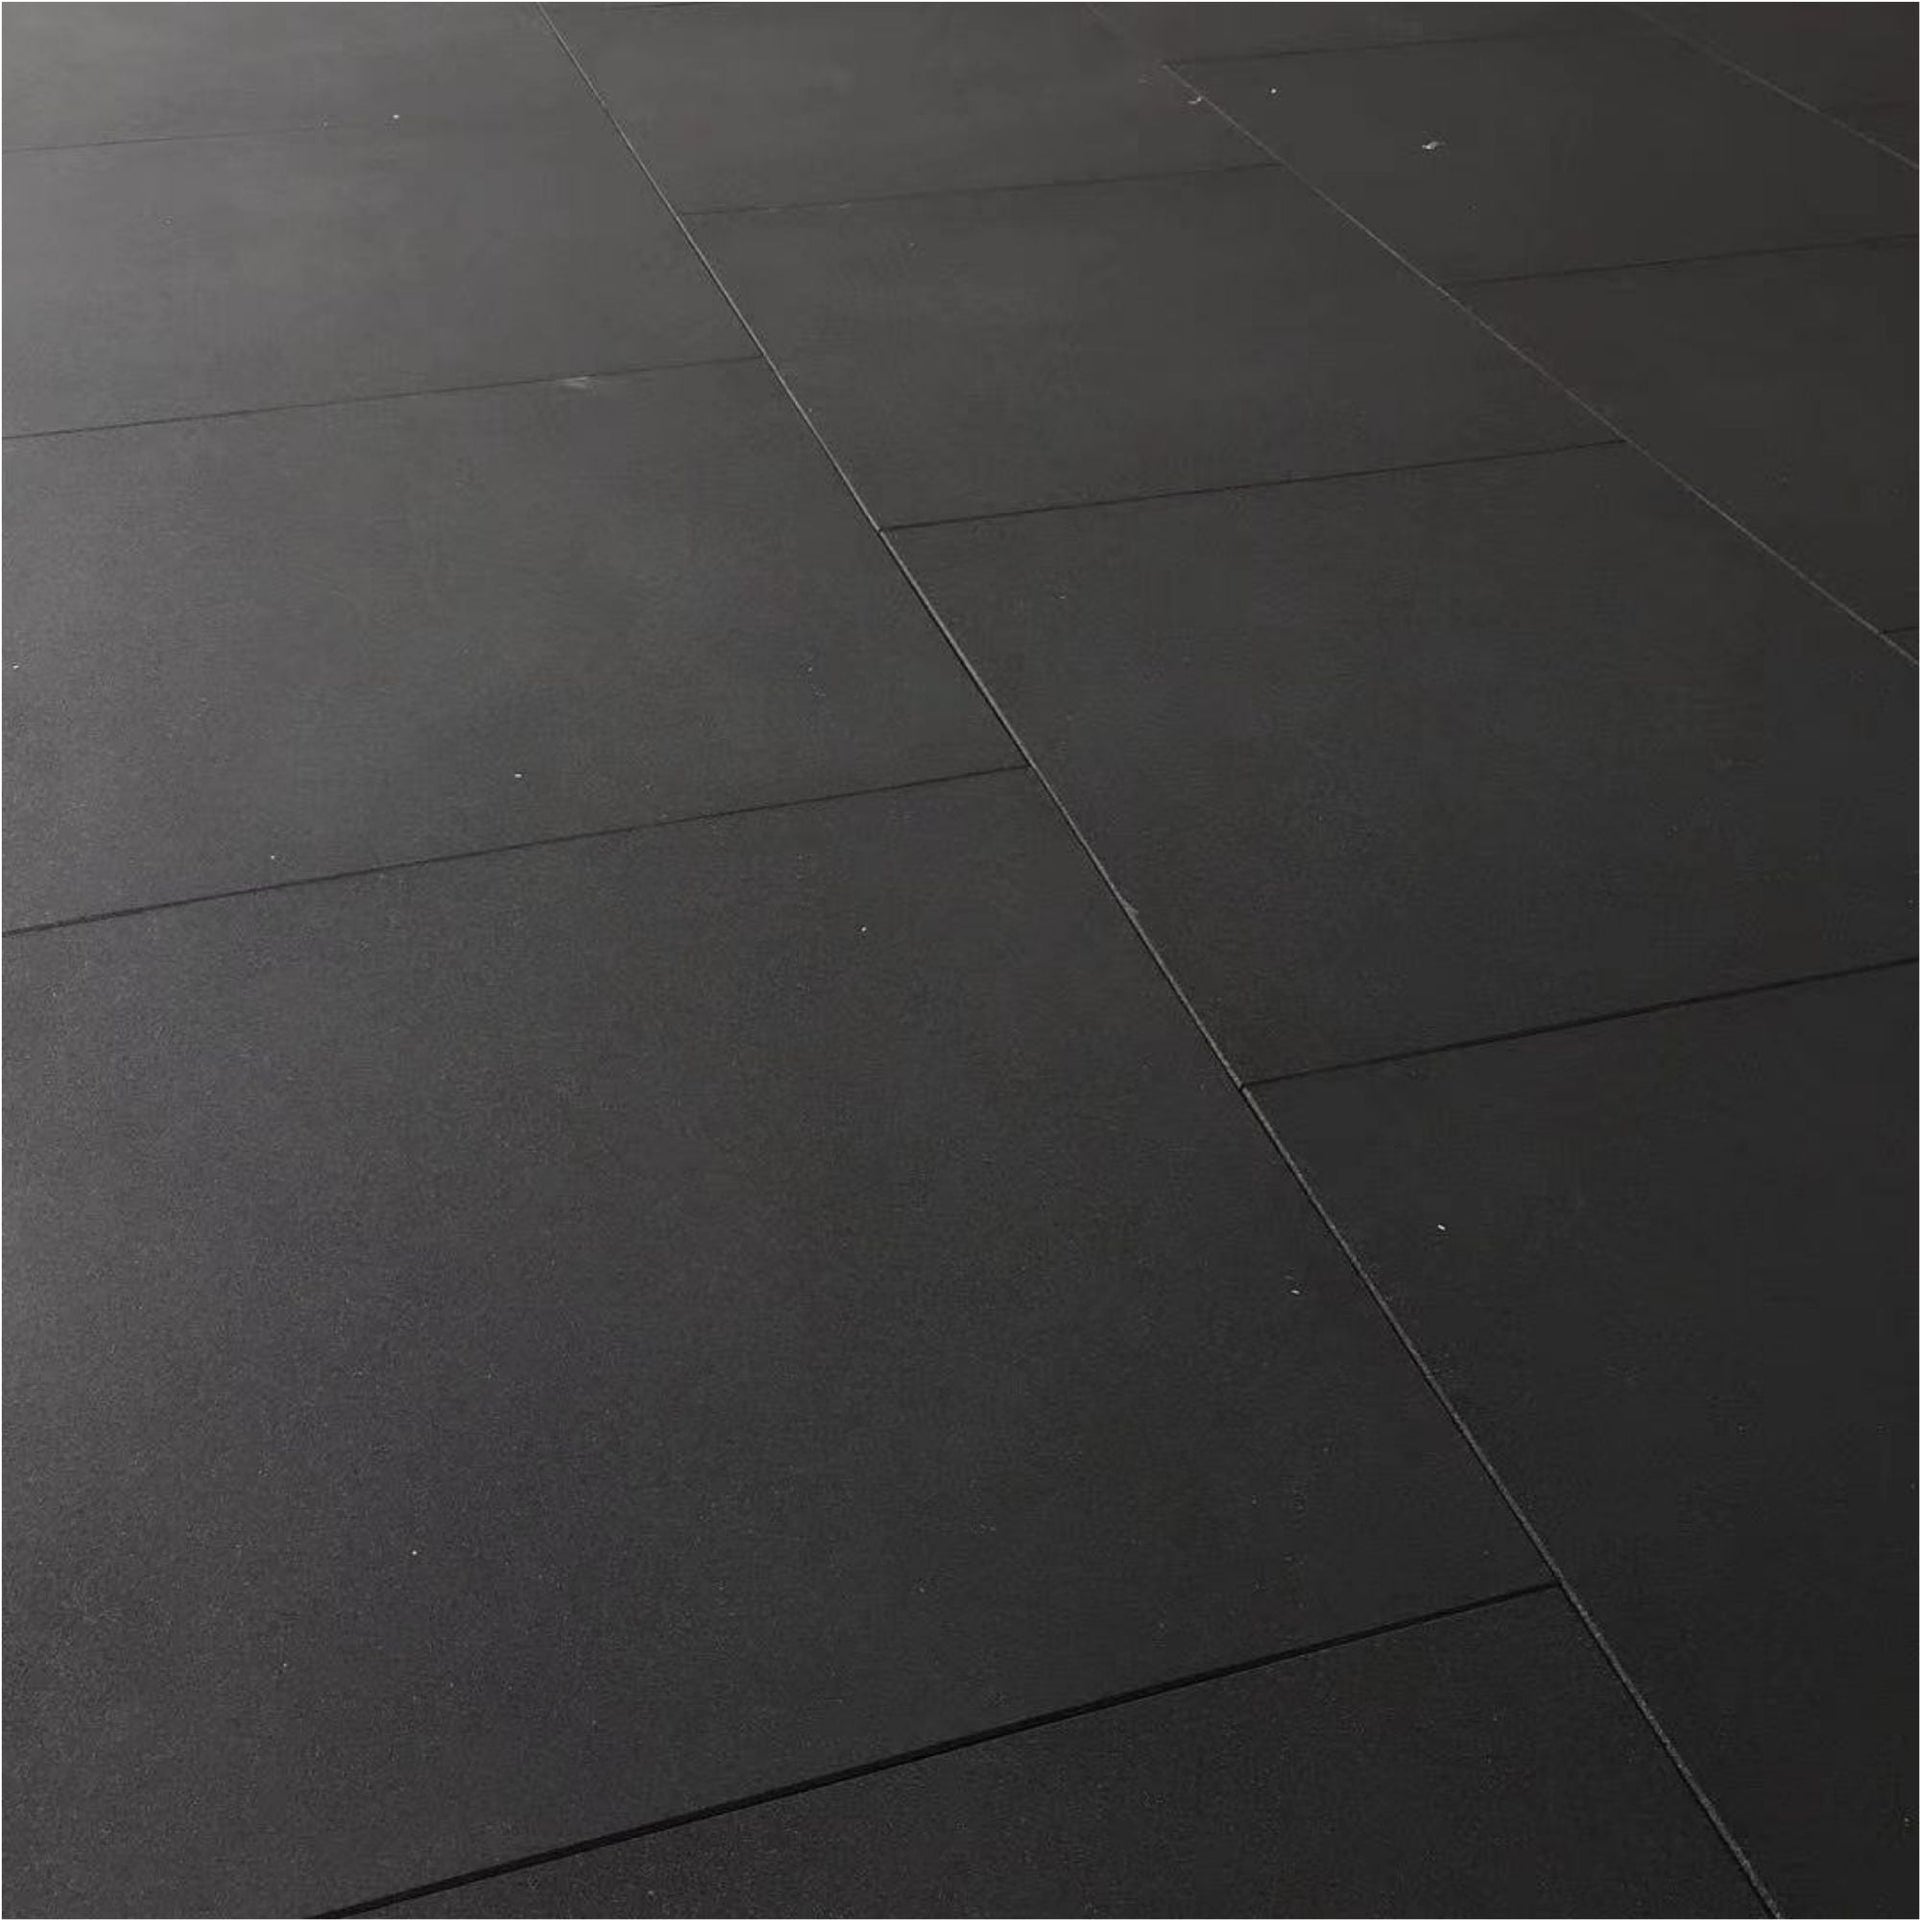 commercial rubber floorings for home gyms, play area and fitness centers